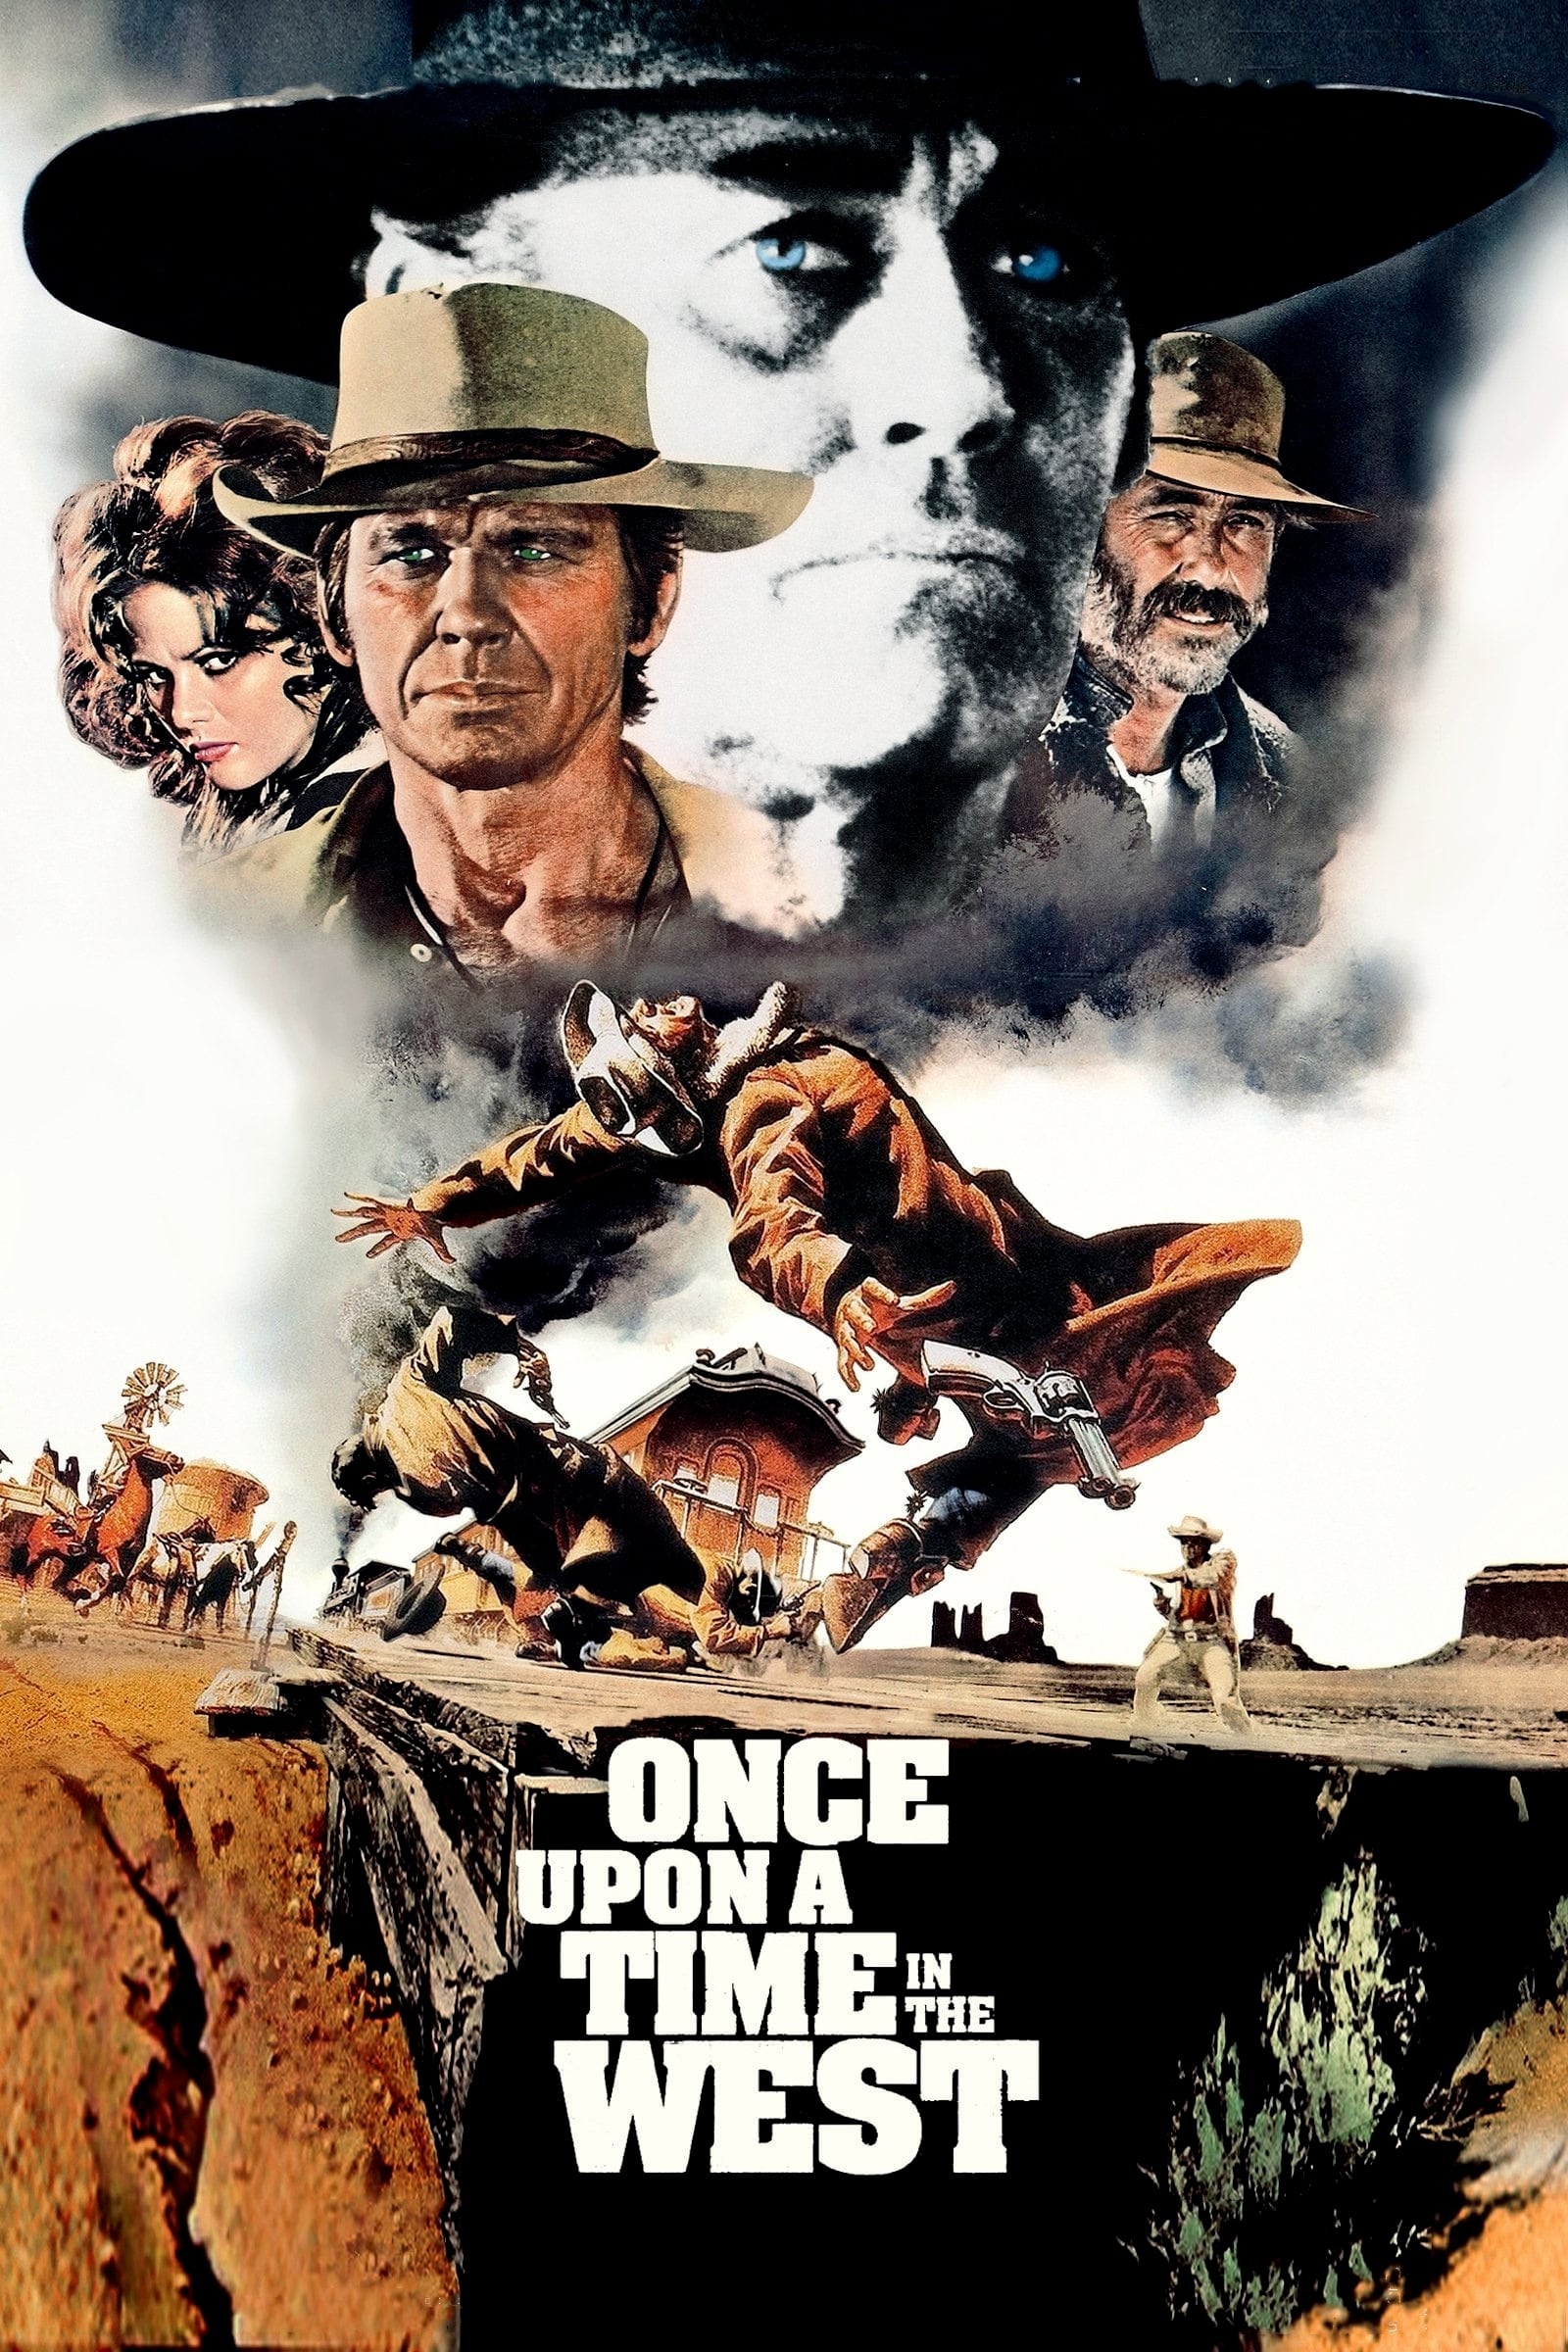 poster for Once Upon a Time in the West